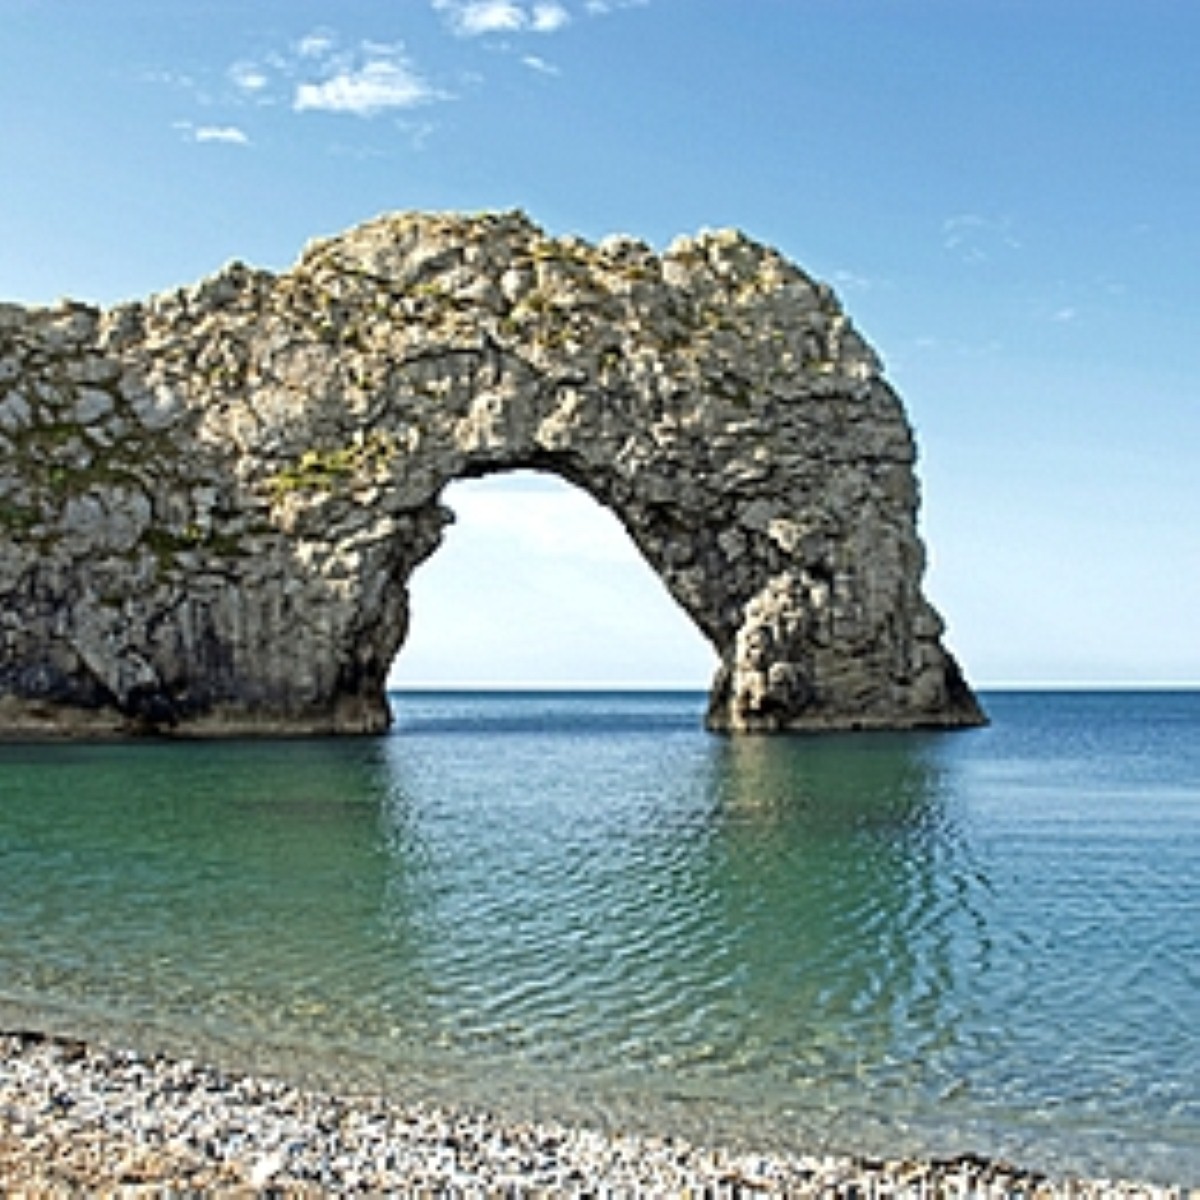 Visitors could try their hand at fossil hunting along the stunning Jurassic Coast